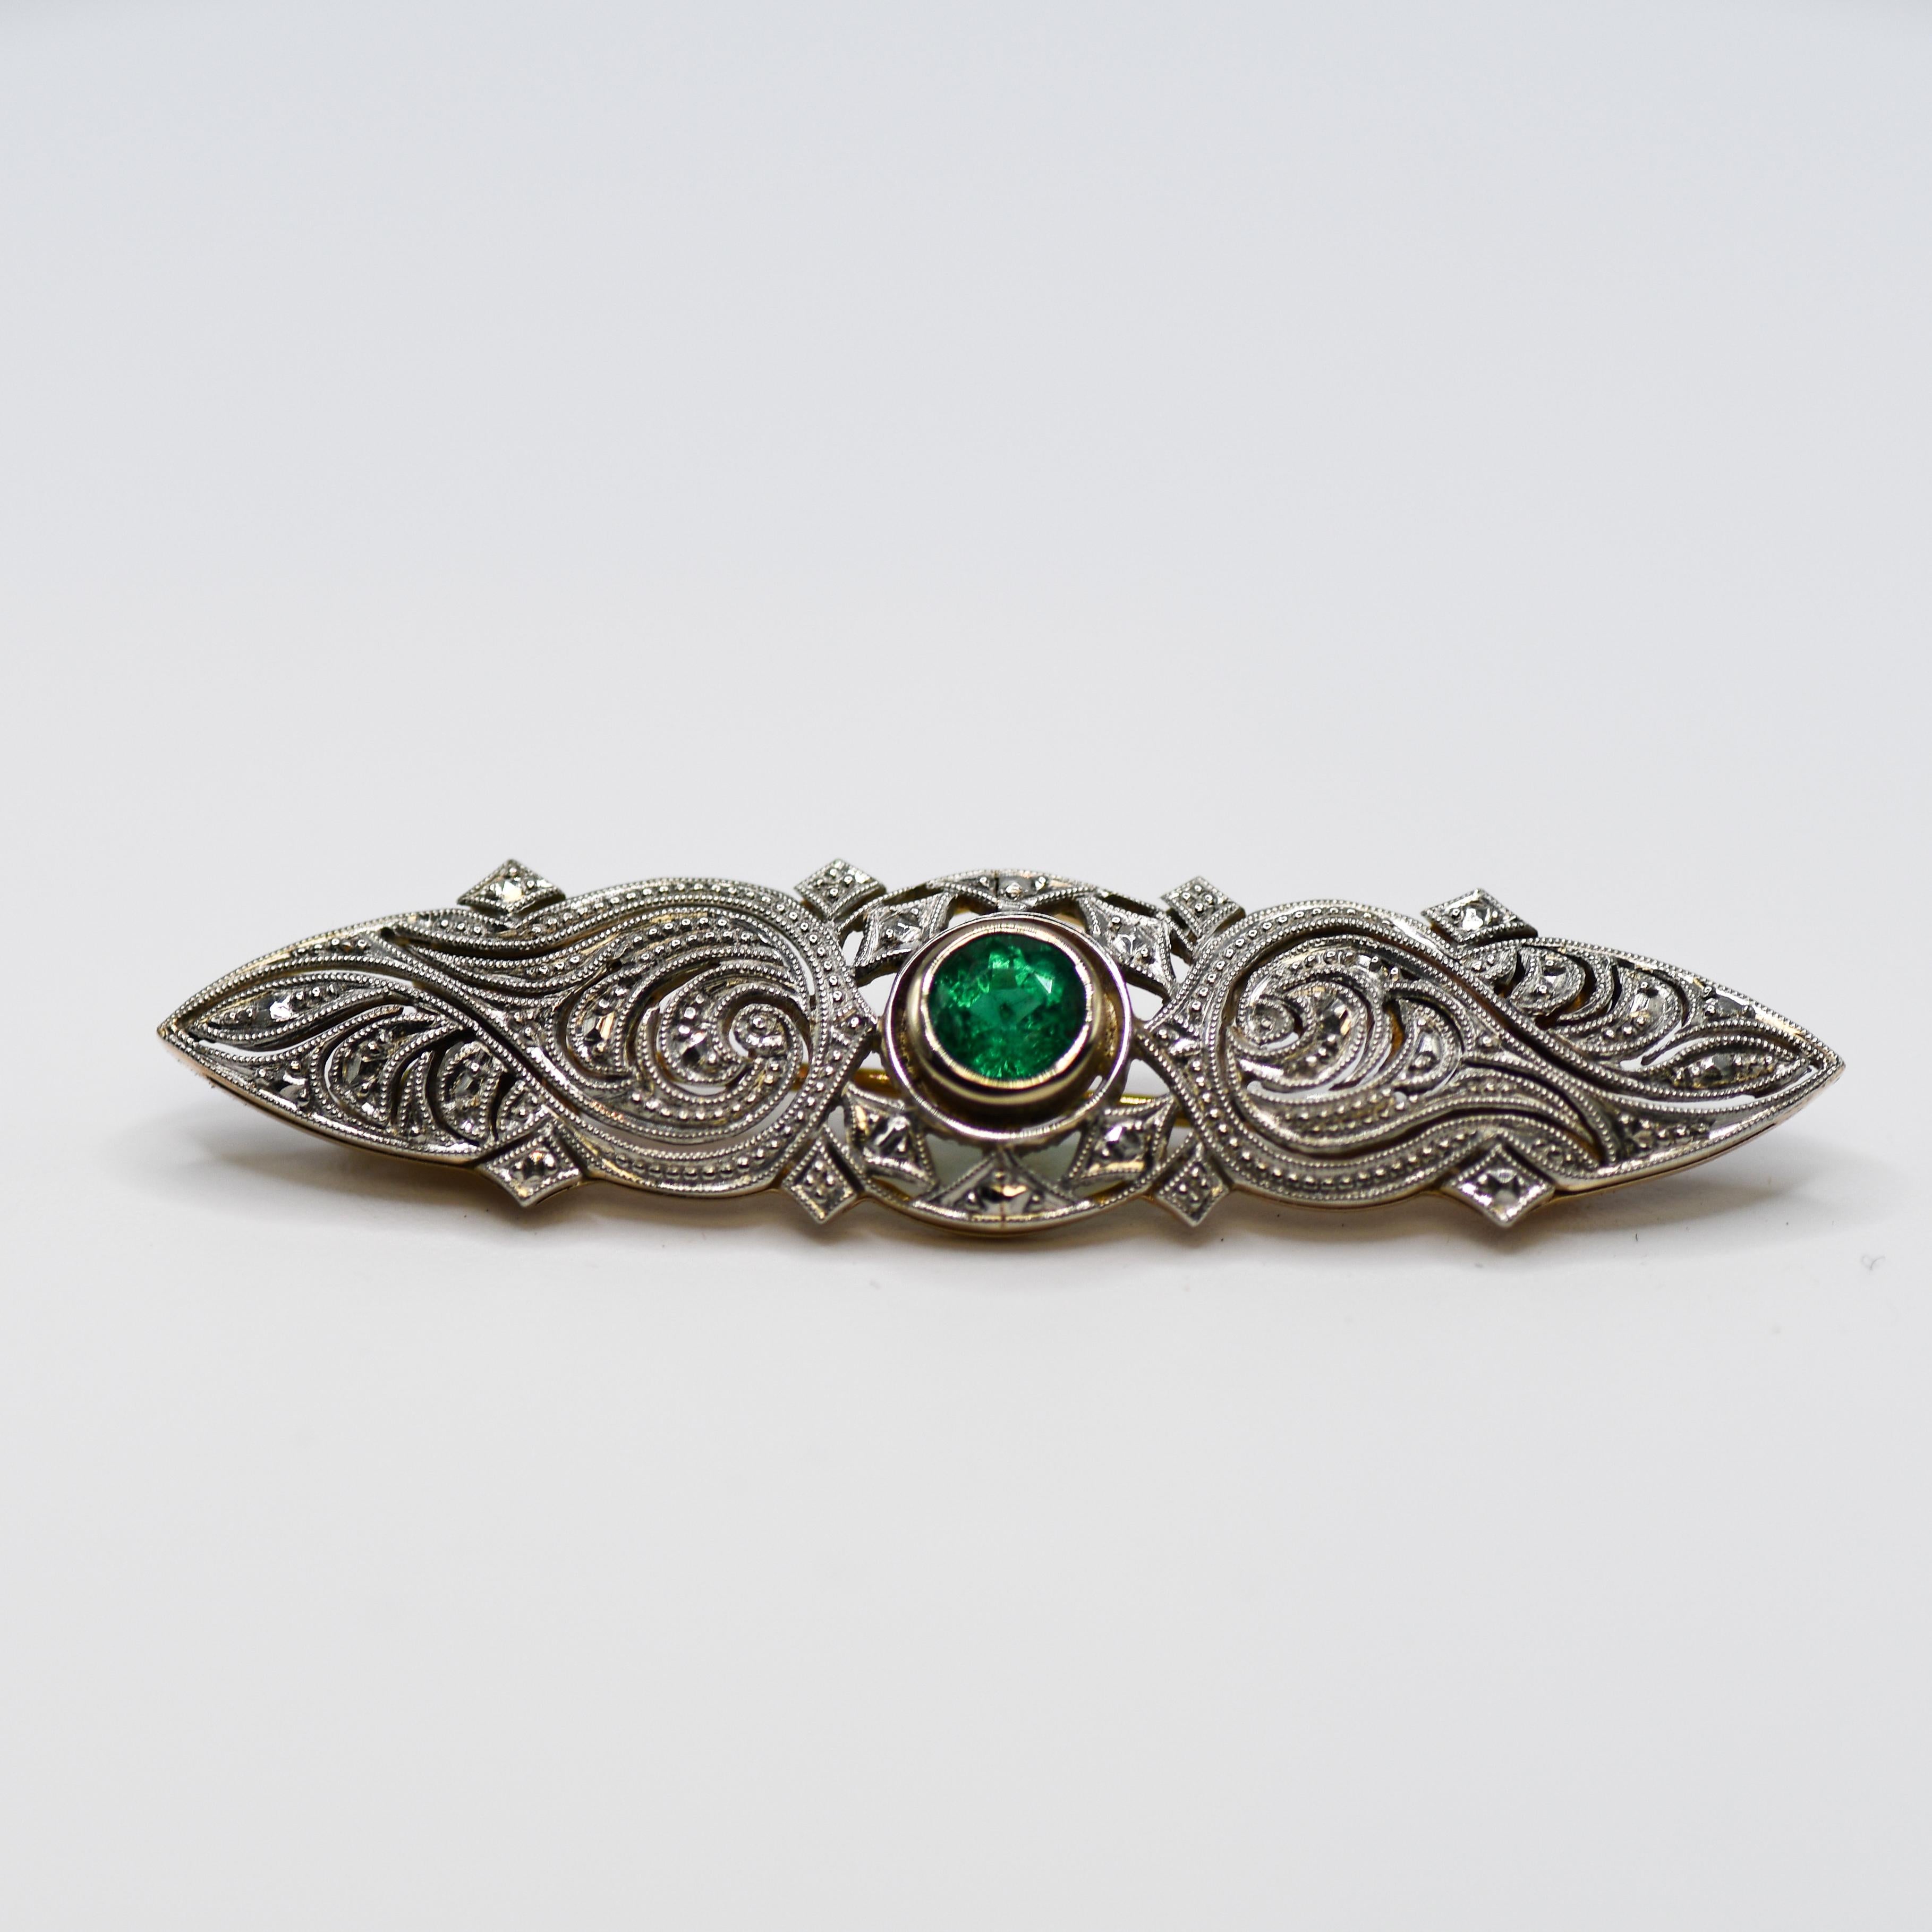 Antique Art Deco brooch with natural emerald.
The top of the brooch tests platinum and the back and pin tests 14k.
Total weight is 6.2 grams.
  Round brilliant cut Colombian emerald, .60 carats, very good color.
Excellent metal work in the